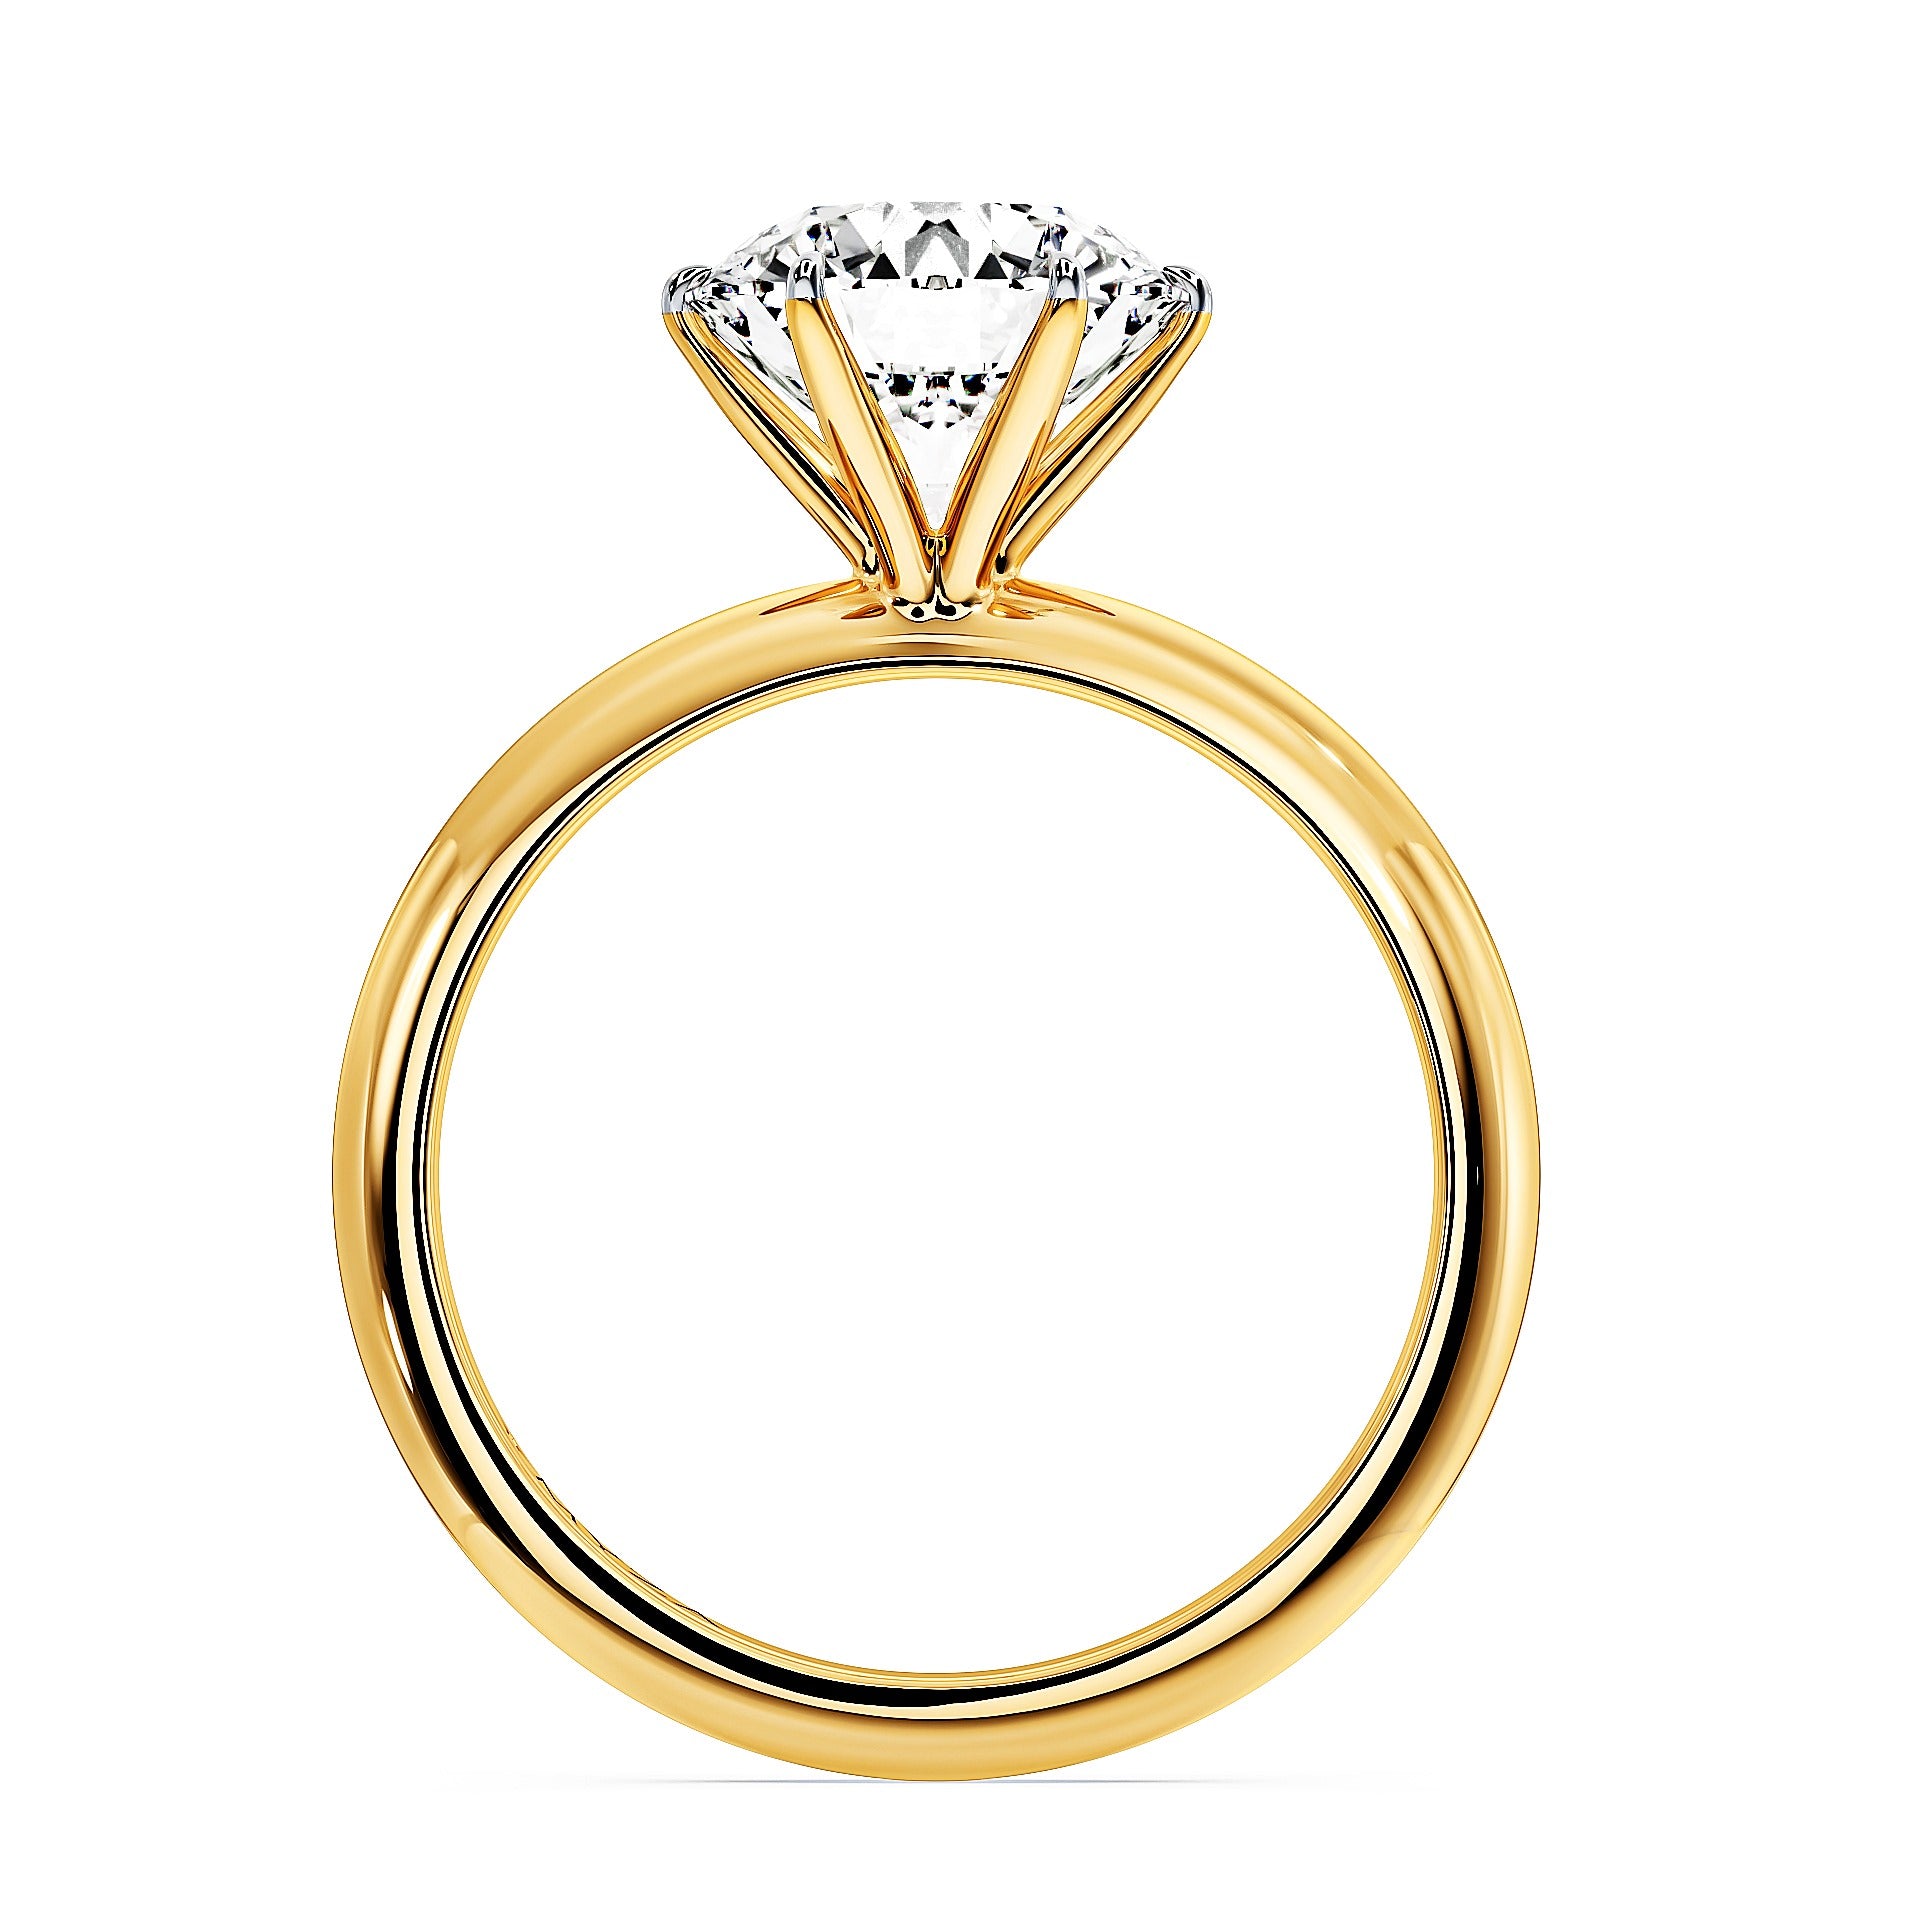 IGI certified lab-grown diamond ring in 18kt hallmark gold, 2 carats, ISO and BIS certified. Viewed from three-quarters angle. Perfect for women's jewelry. High-quality craftsmanship and authenticity guaranteed.